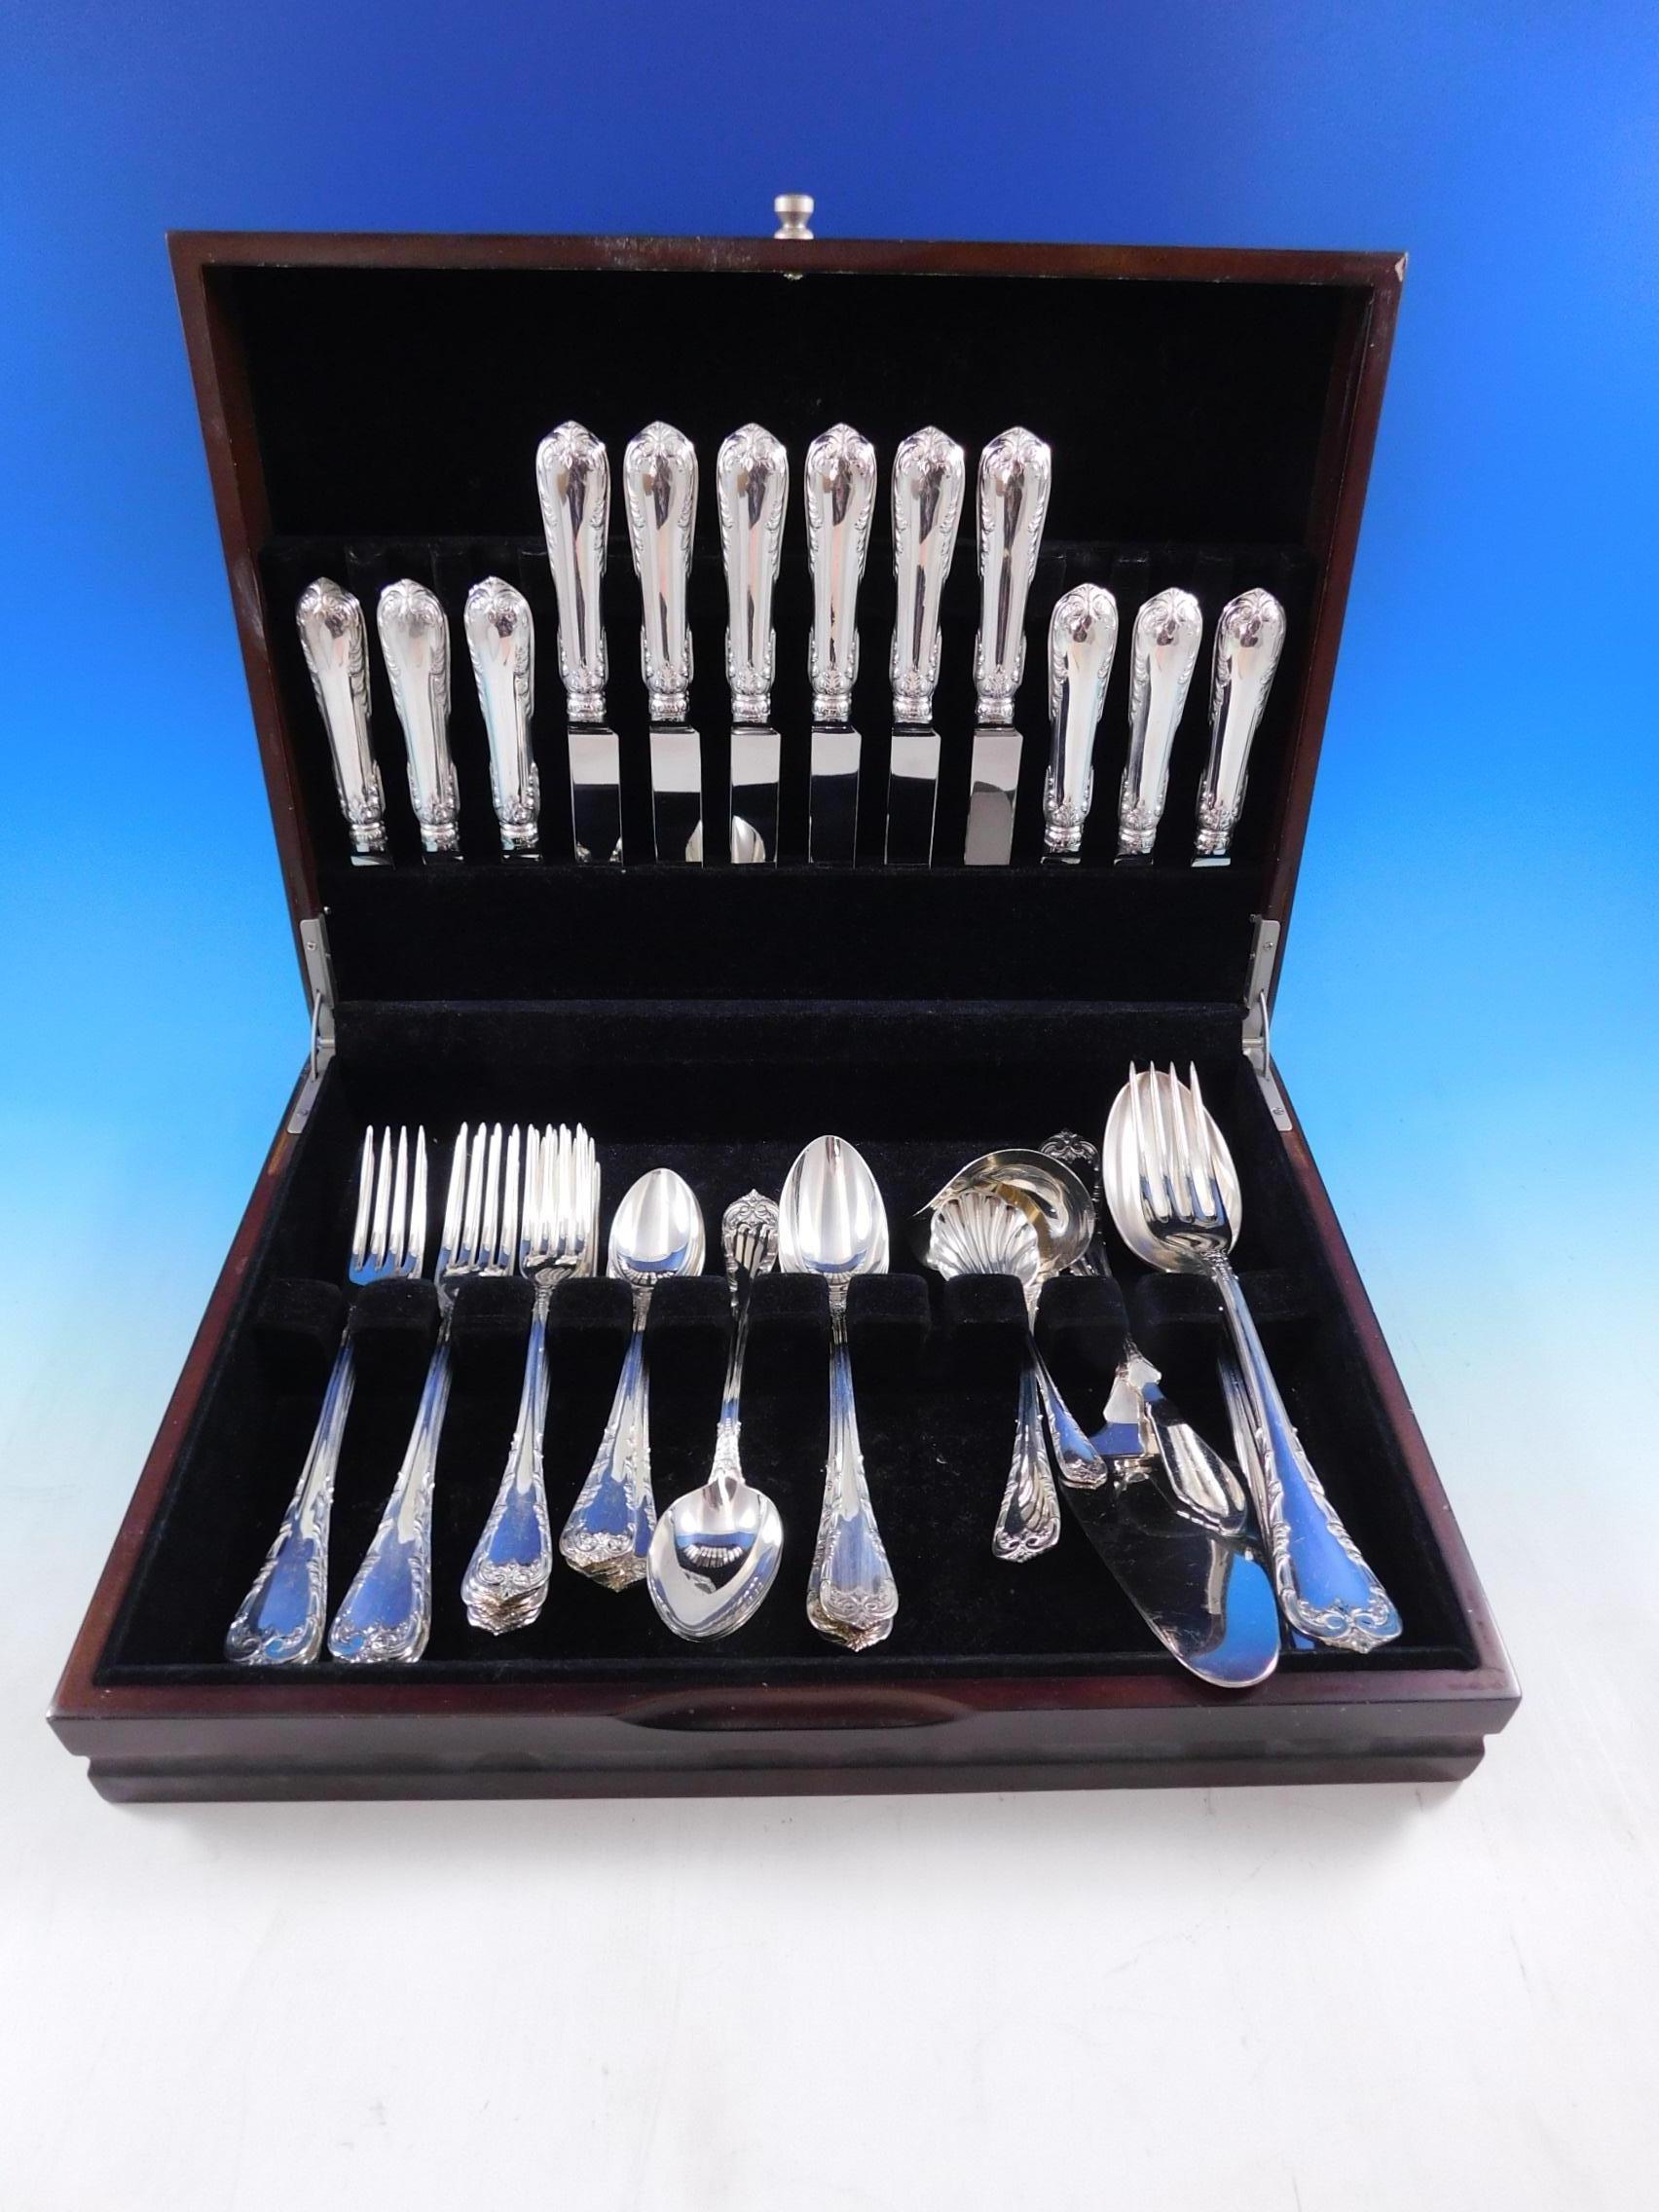 Fleury by Fortunoff Italy Sterling Silver Flatware set, 42 pieces. This set includes:

6 Luncheon Knives, 8 1/4